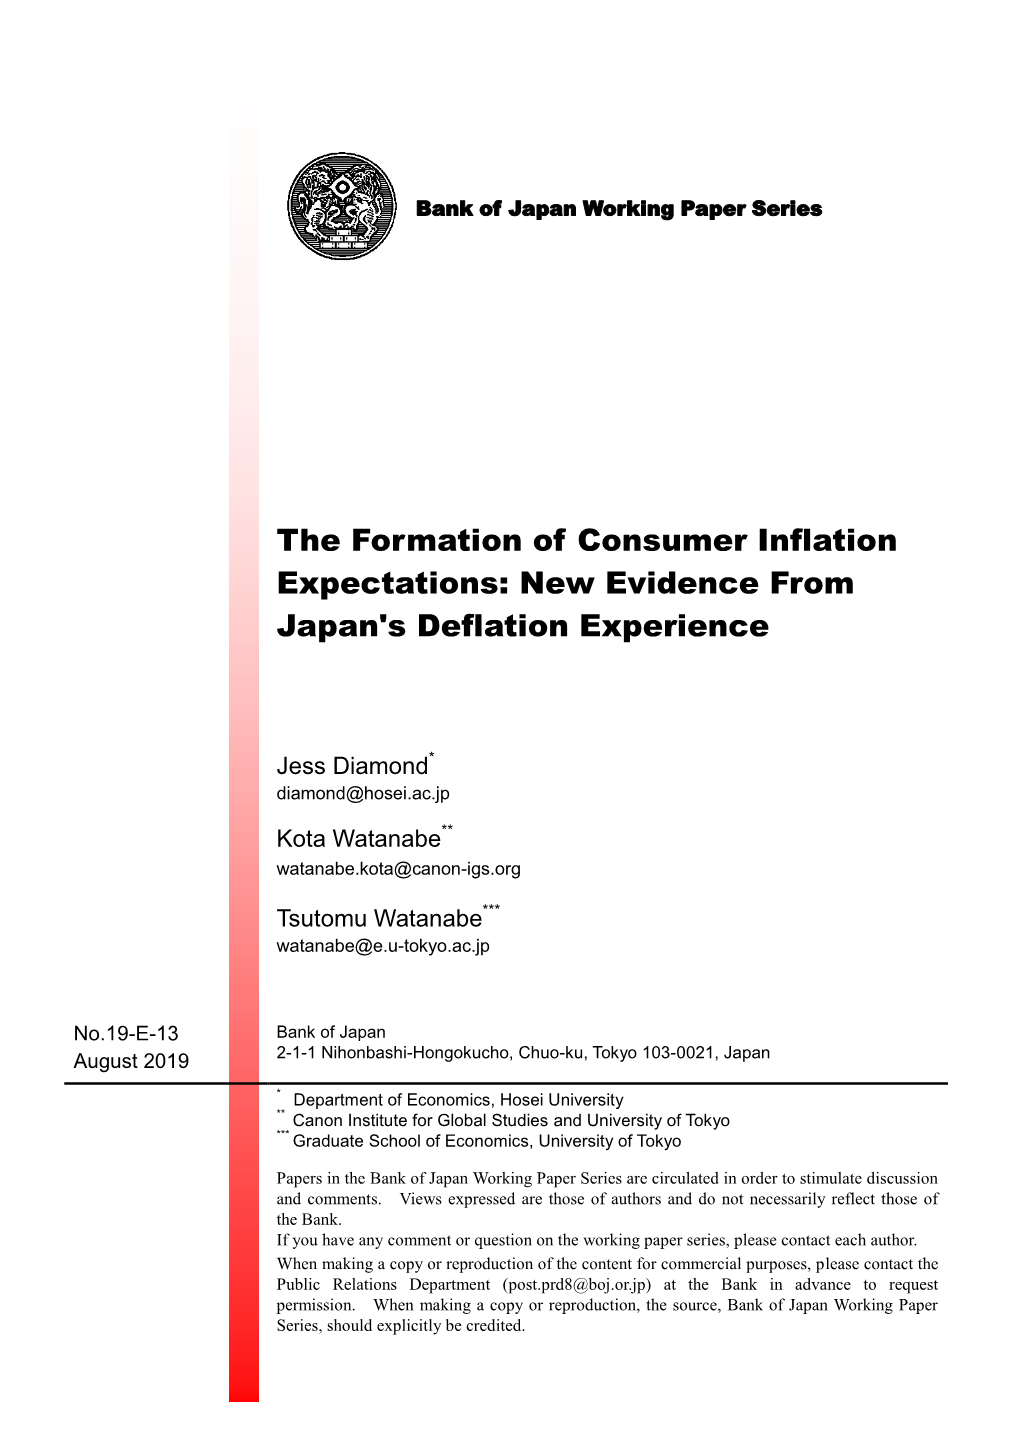 The Formation of Consumer Inflation Expectations: New Evidence from Japan's Deflation Experience